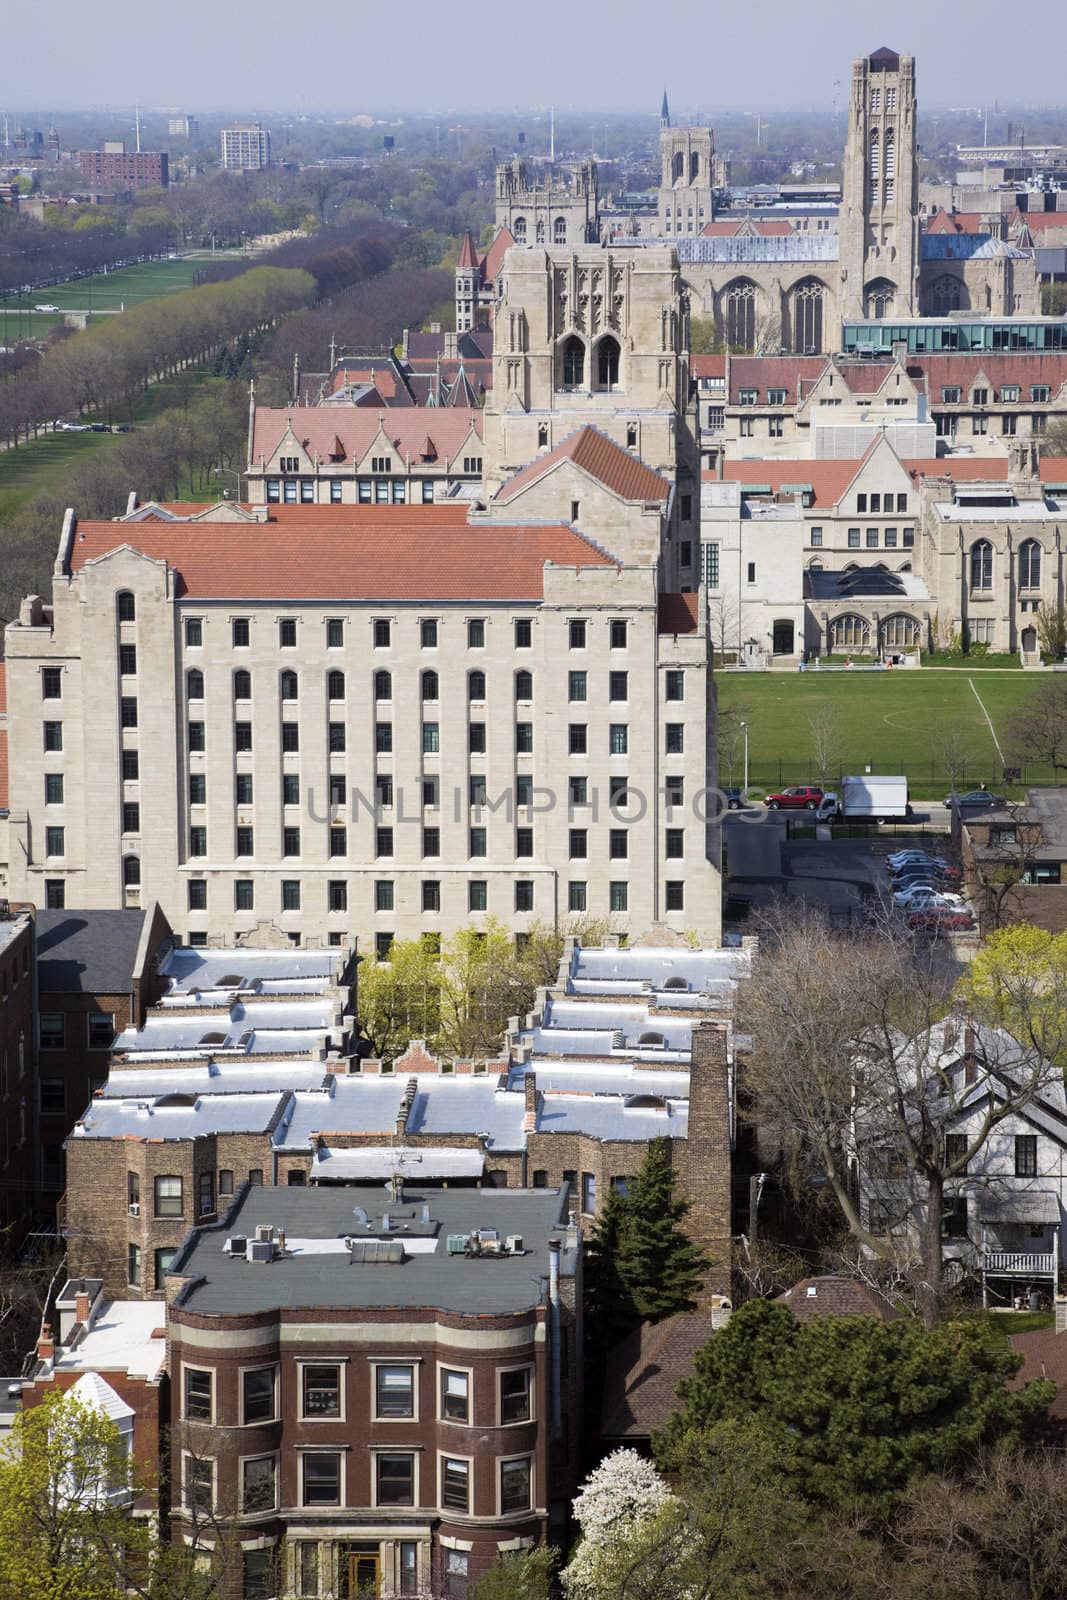 Churches in Chicago - aerial view of University of Chicago area.